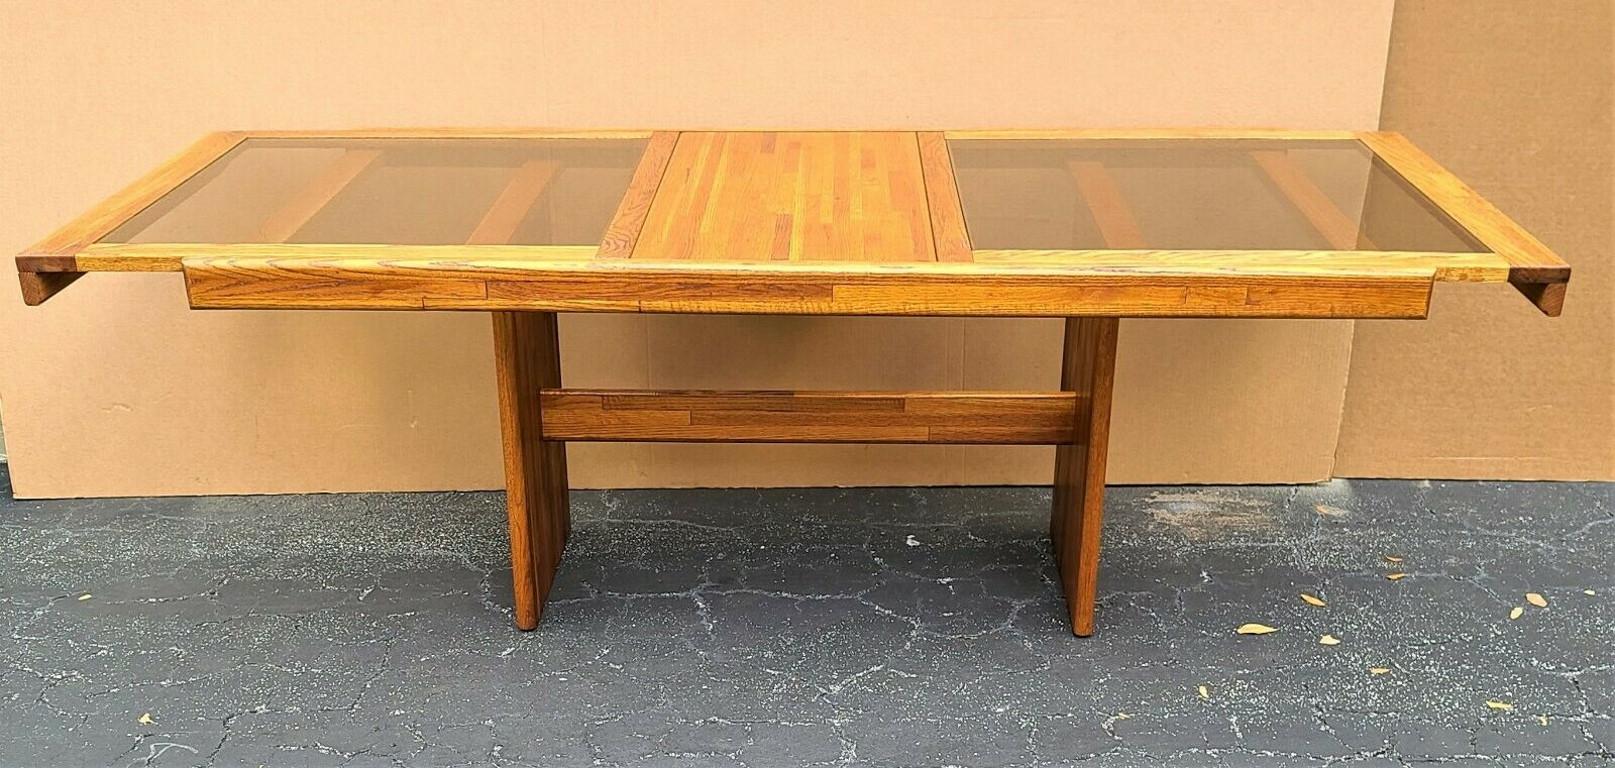 Offering one of our recent palm beach estate fine furniture acquisitions of a
MCM vintage solid teak smoked glass extendable with pop up leaf dining table

Approximate measurements in inches
Width: 88.75